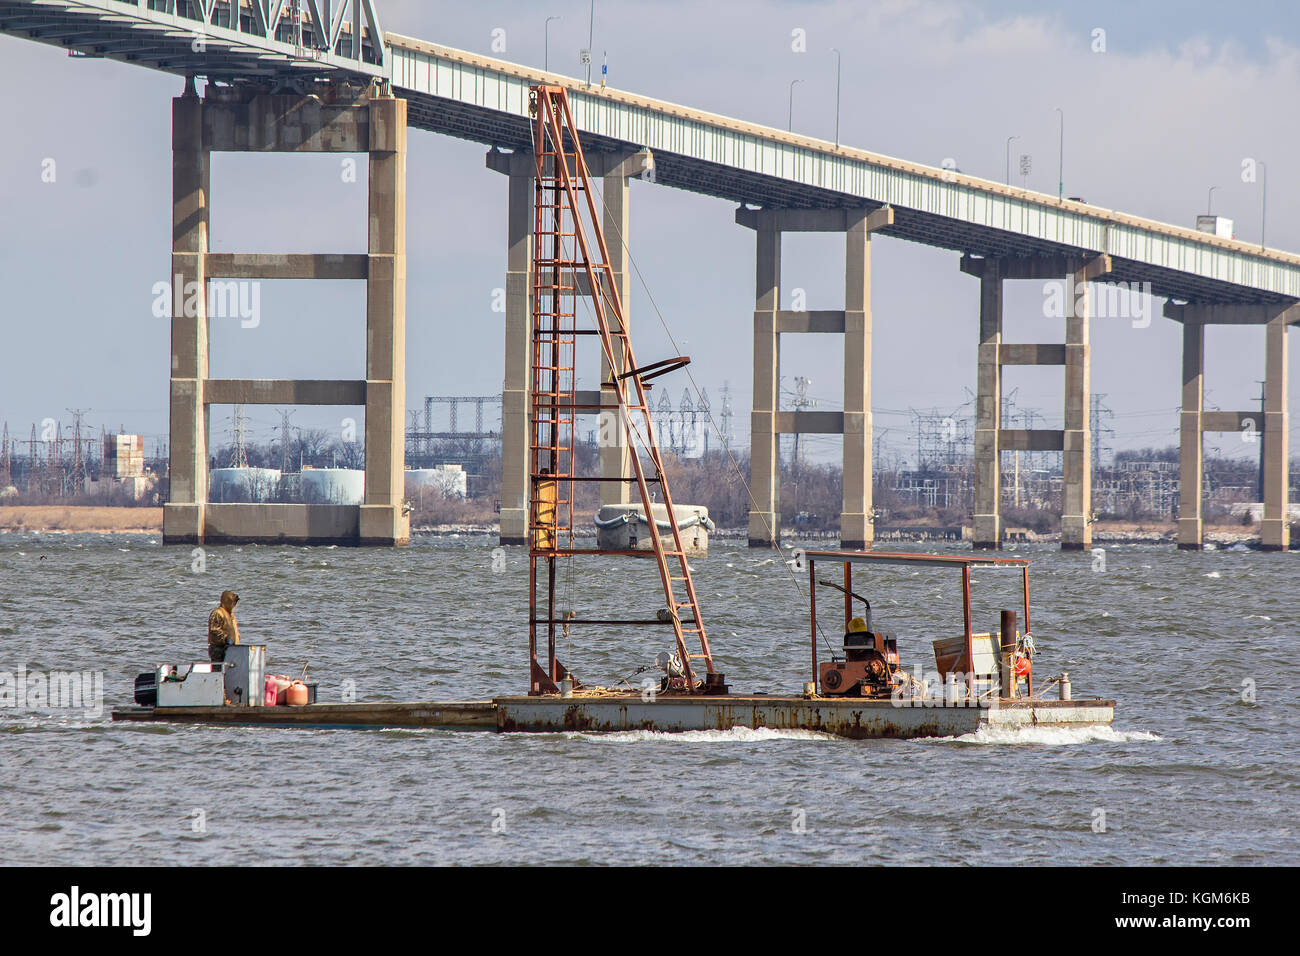 Small powered barge with pile driver derrick near Francis Scott Key Bridge in Baltimore Stock Photo